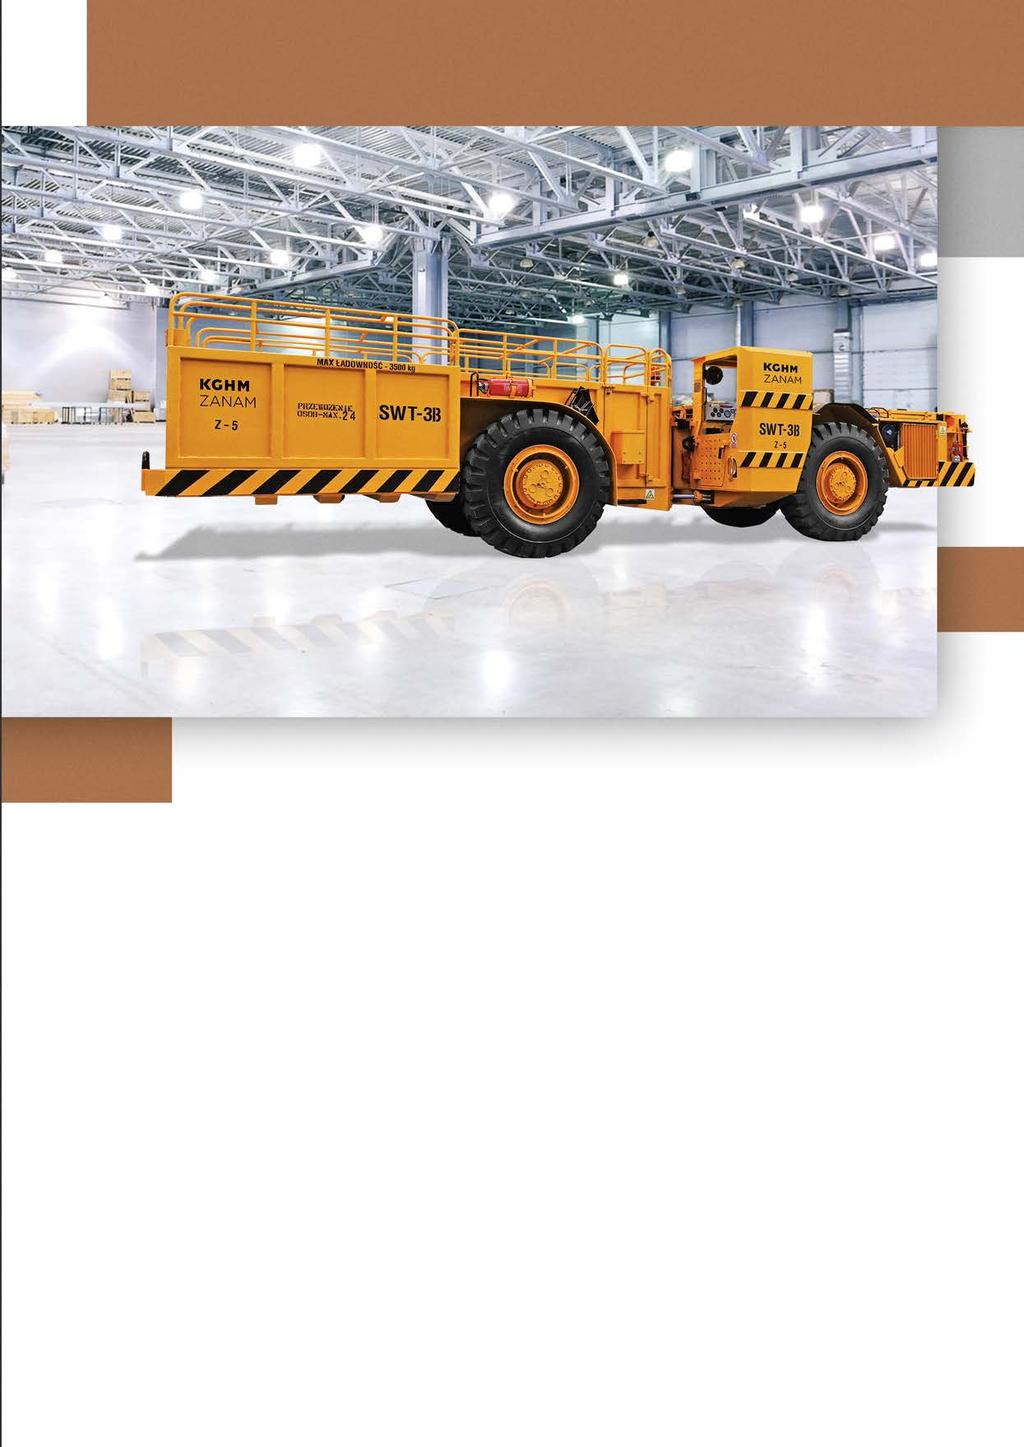 SELF-PROPELLED DRILLING AND ROOF BOLTING TRUCKS 01 I Self-propelled drilling and roof bolting trucks are machines with one working stand and one boom, designed for drilling blast holes (drills) and